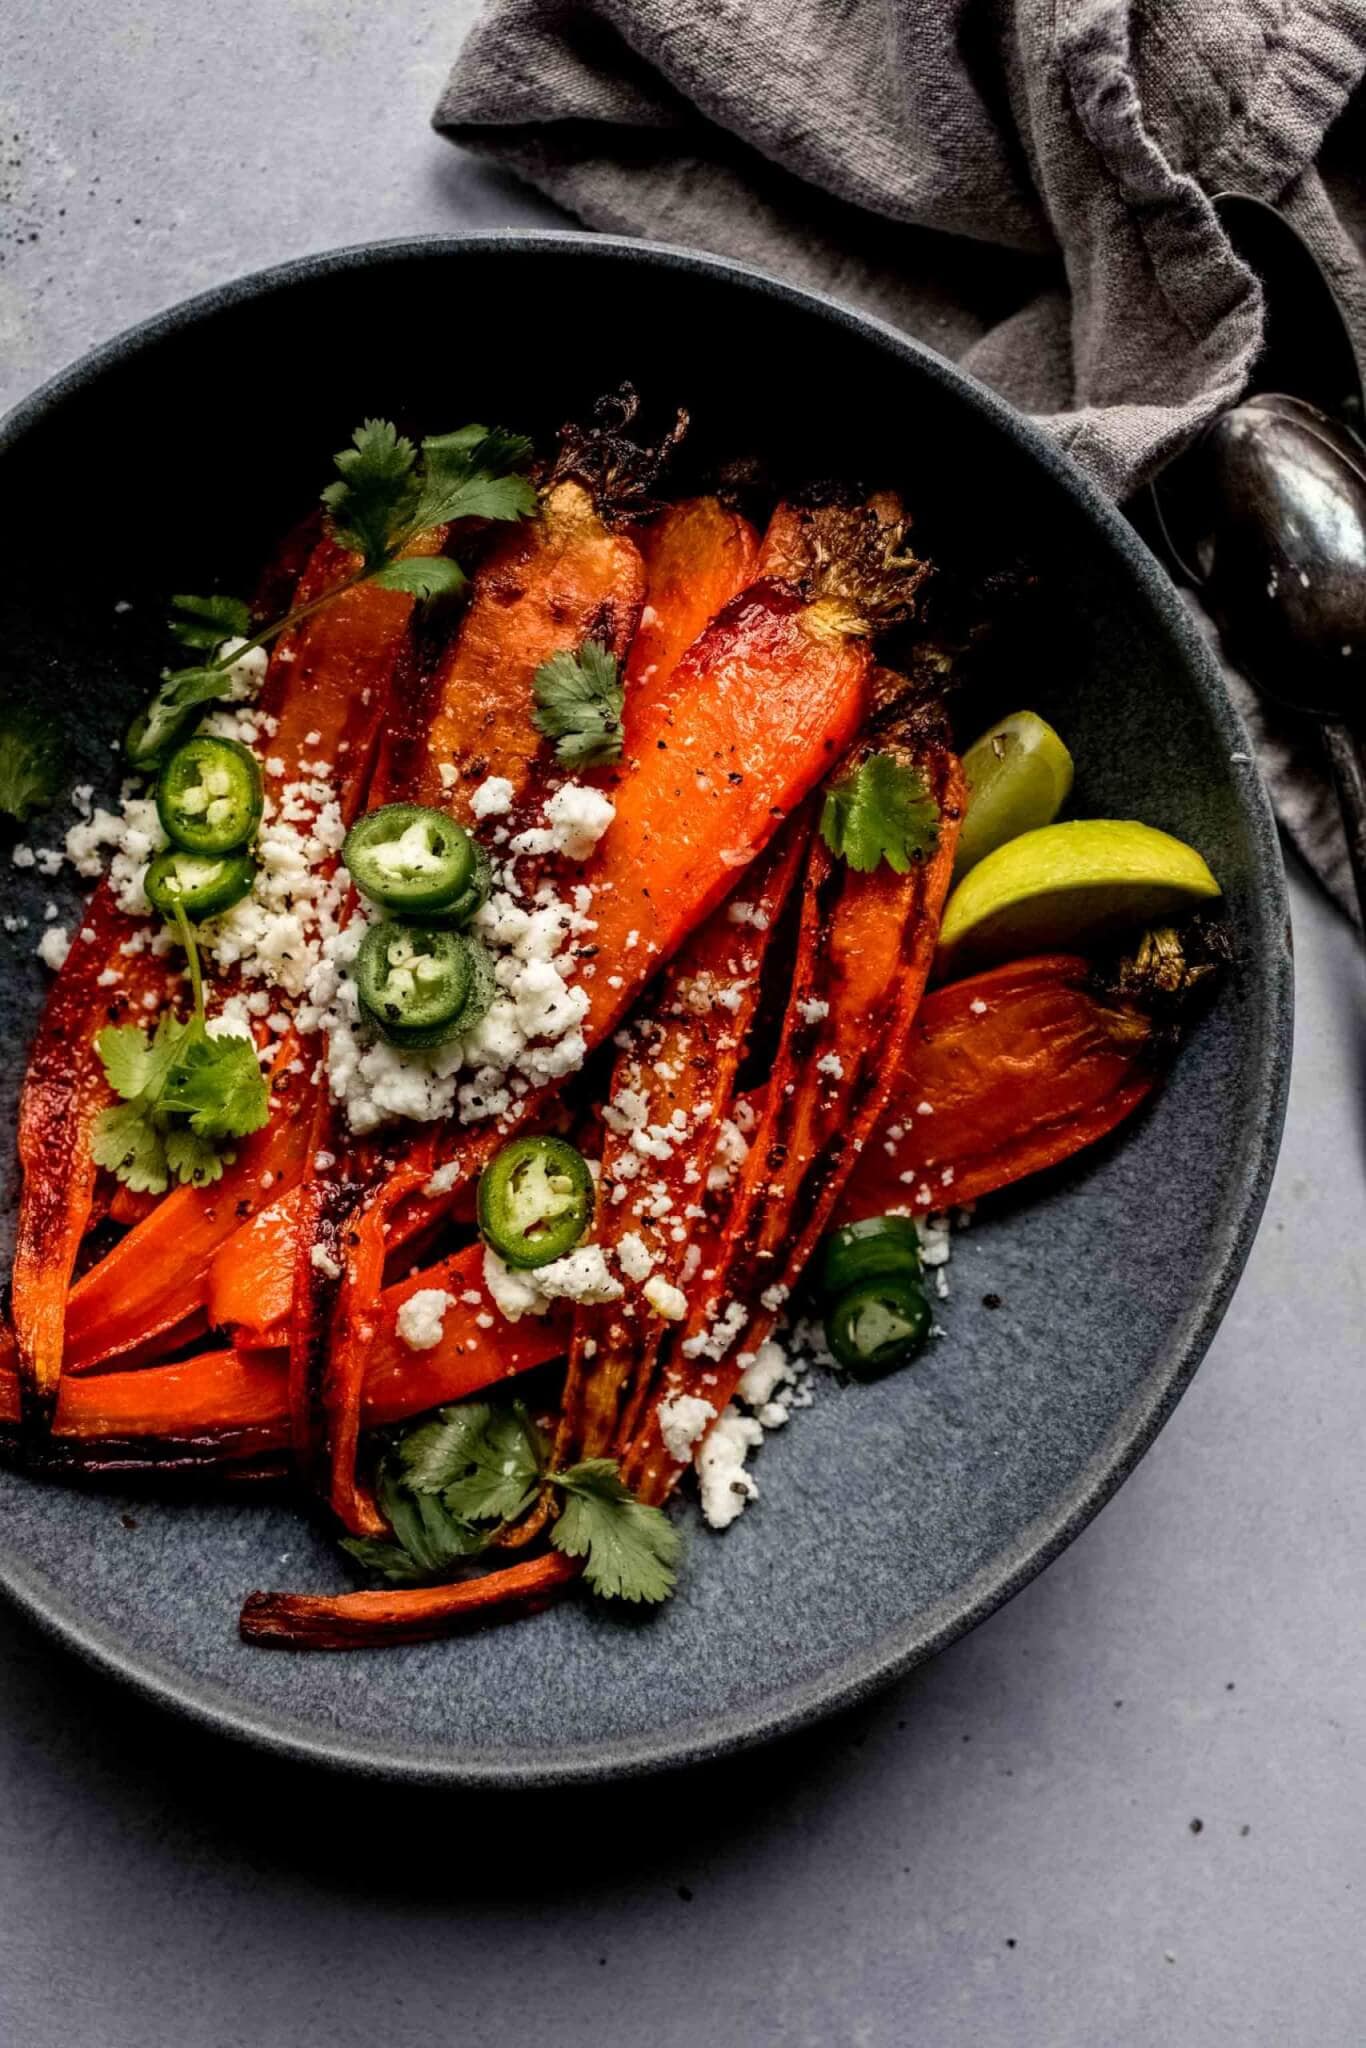 Roasted carrots in grey bowl topped with jalapenos and cotija cheese.